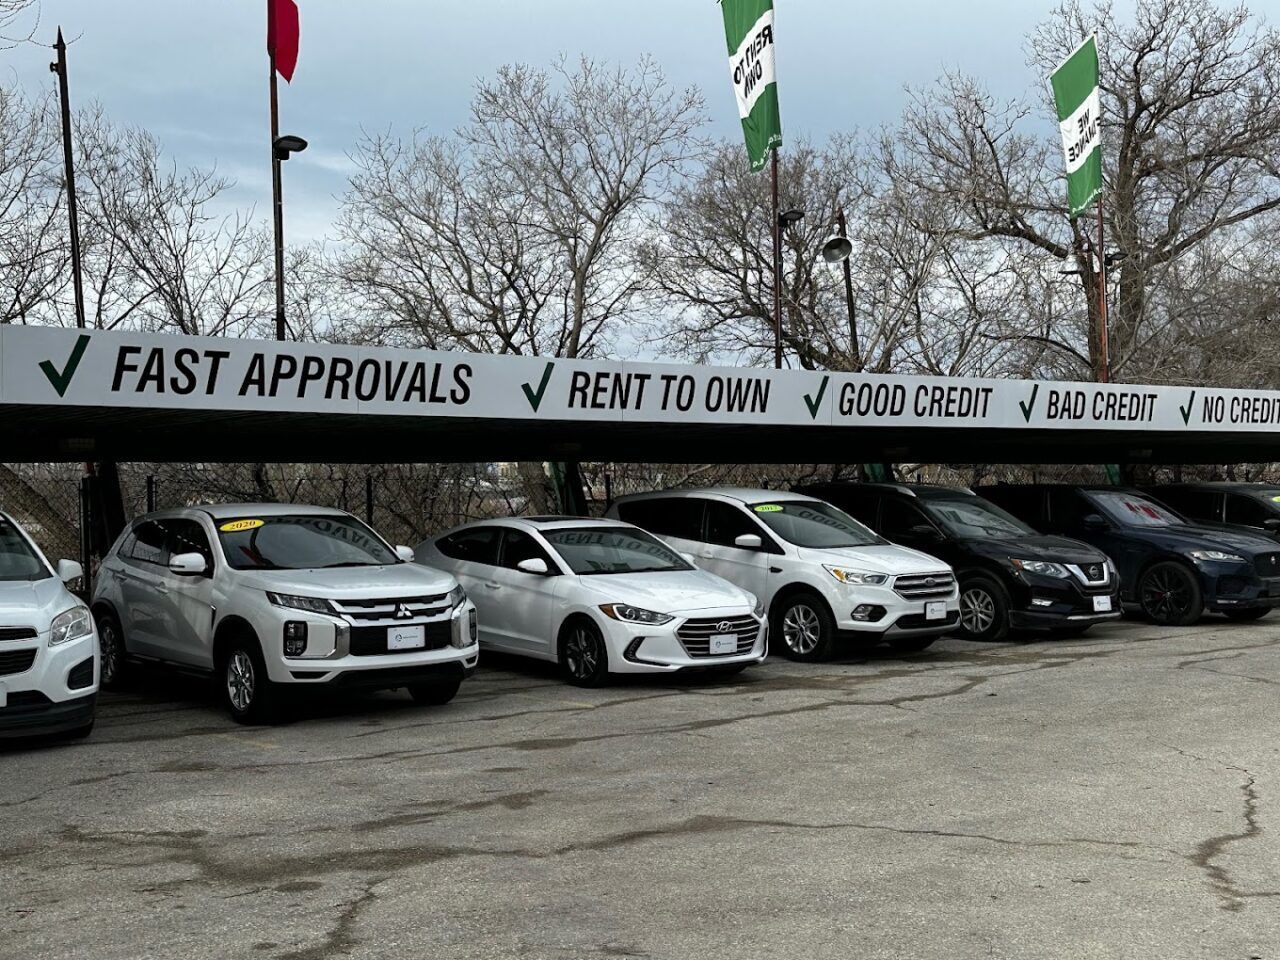 A row of Auto Approved cars are parked under a sign that says 